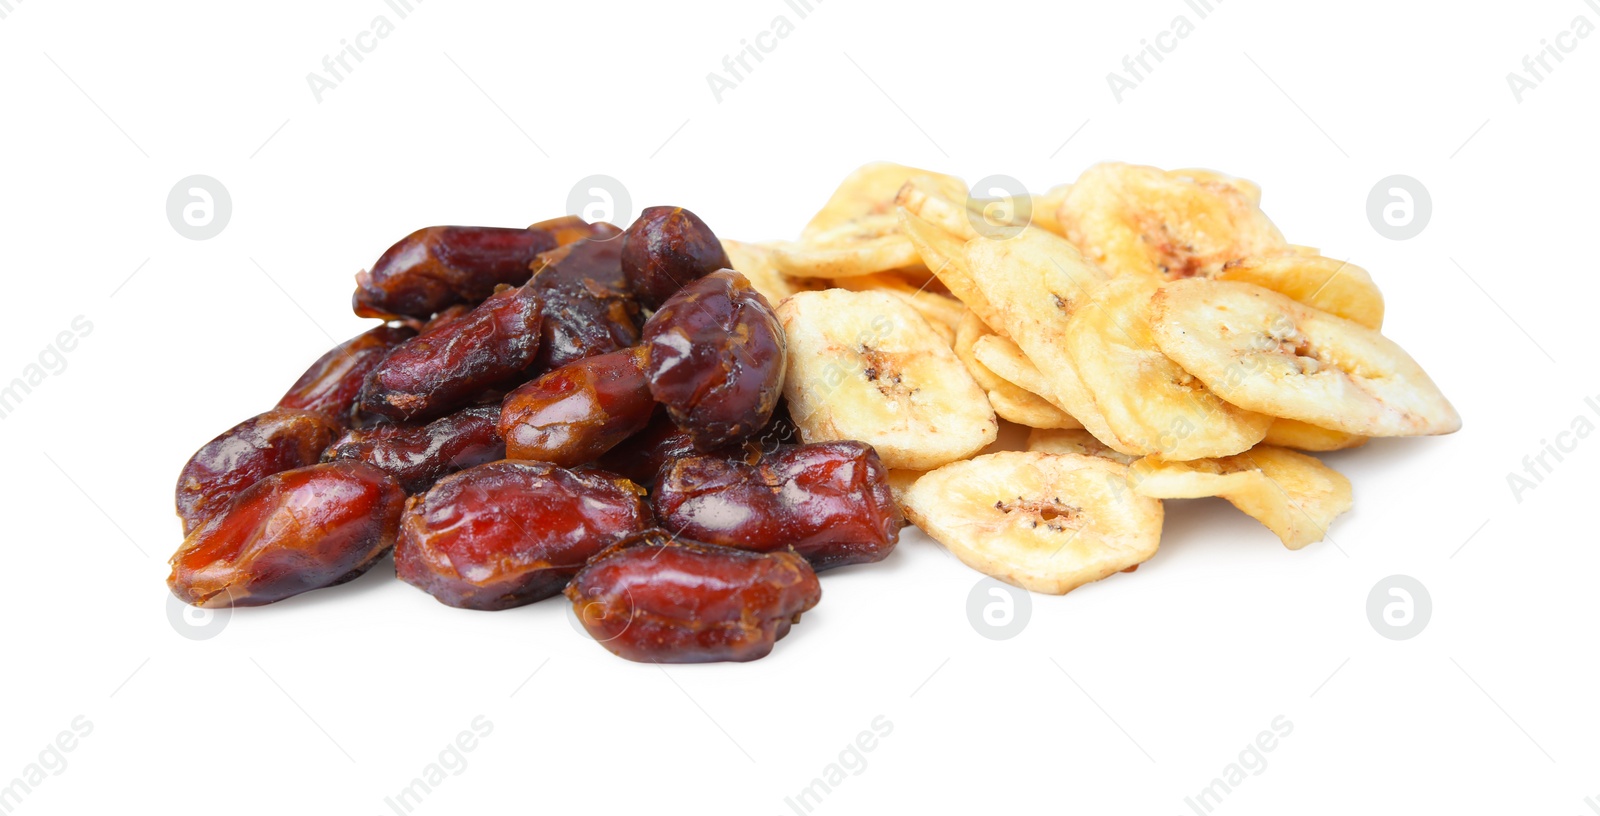 Photo of Tasty dried bananas and dates on white background